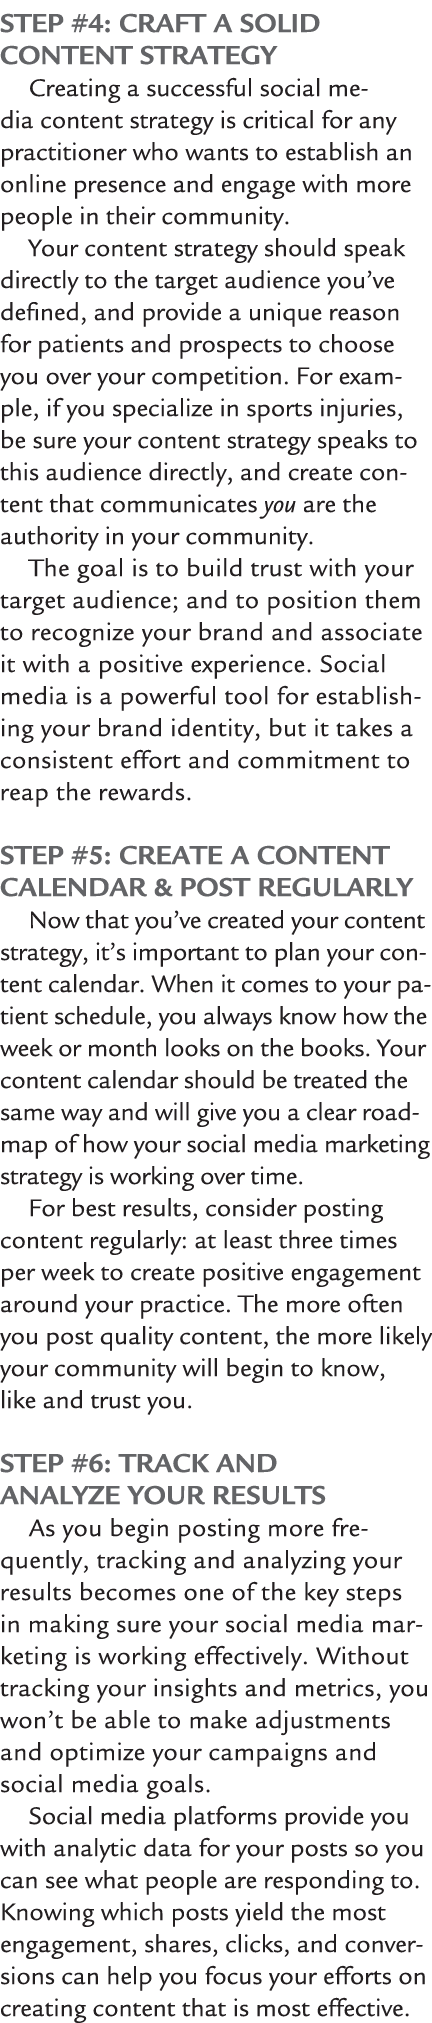 Step #4: Craft a Solid Content Strategy Creating a successful social media content strategy is critical for any pract...